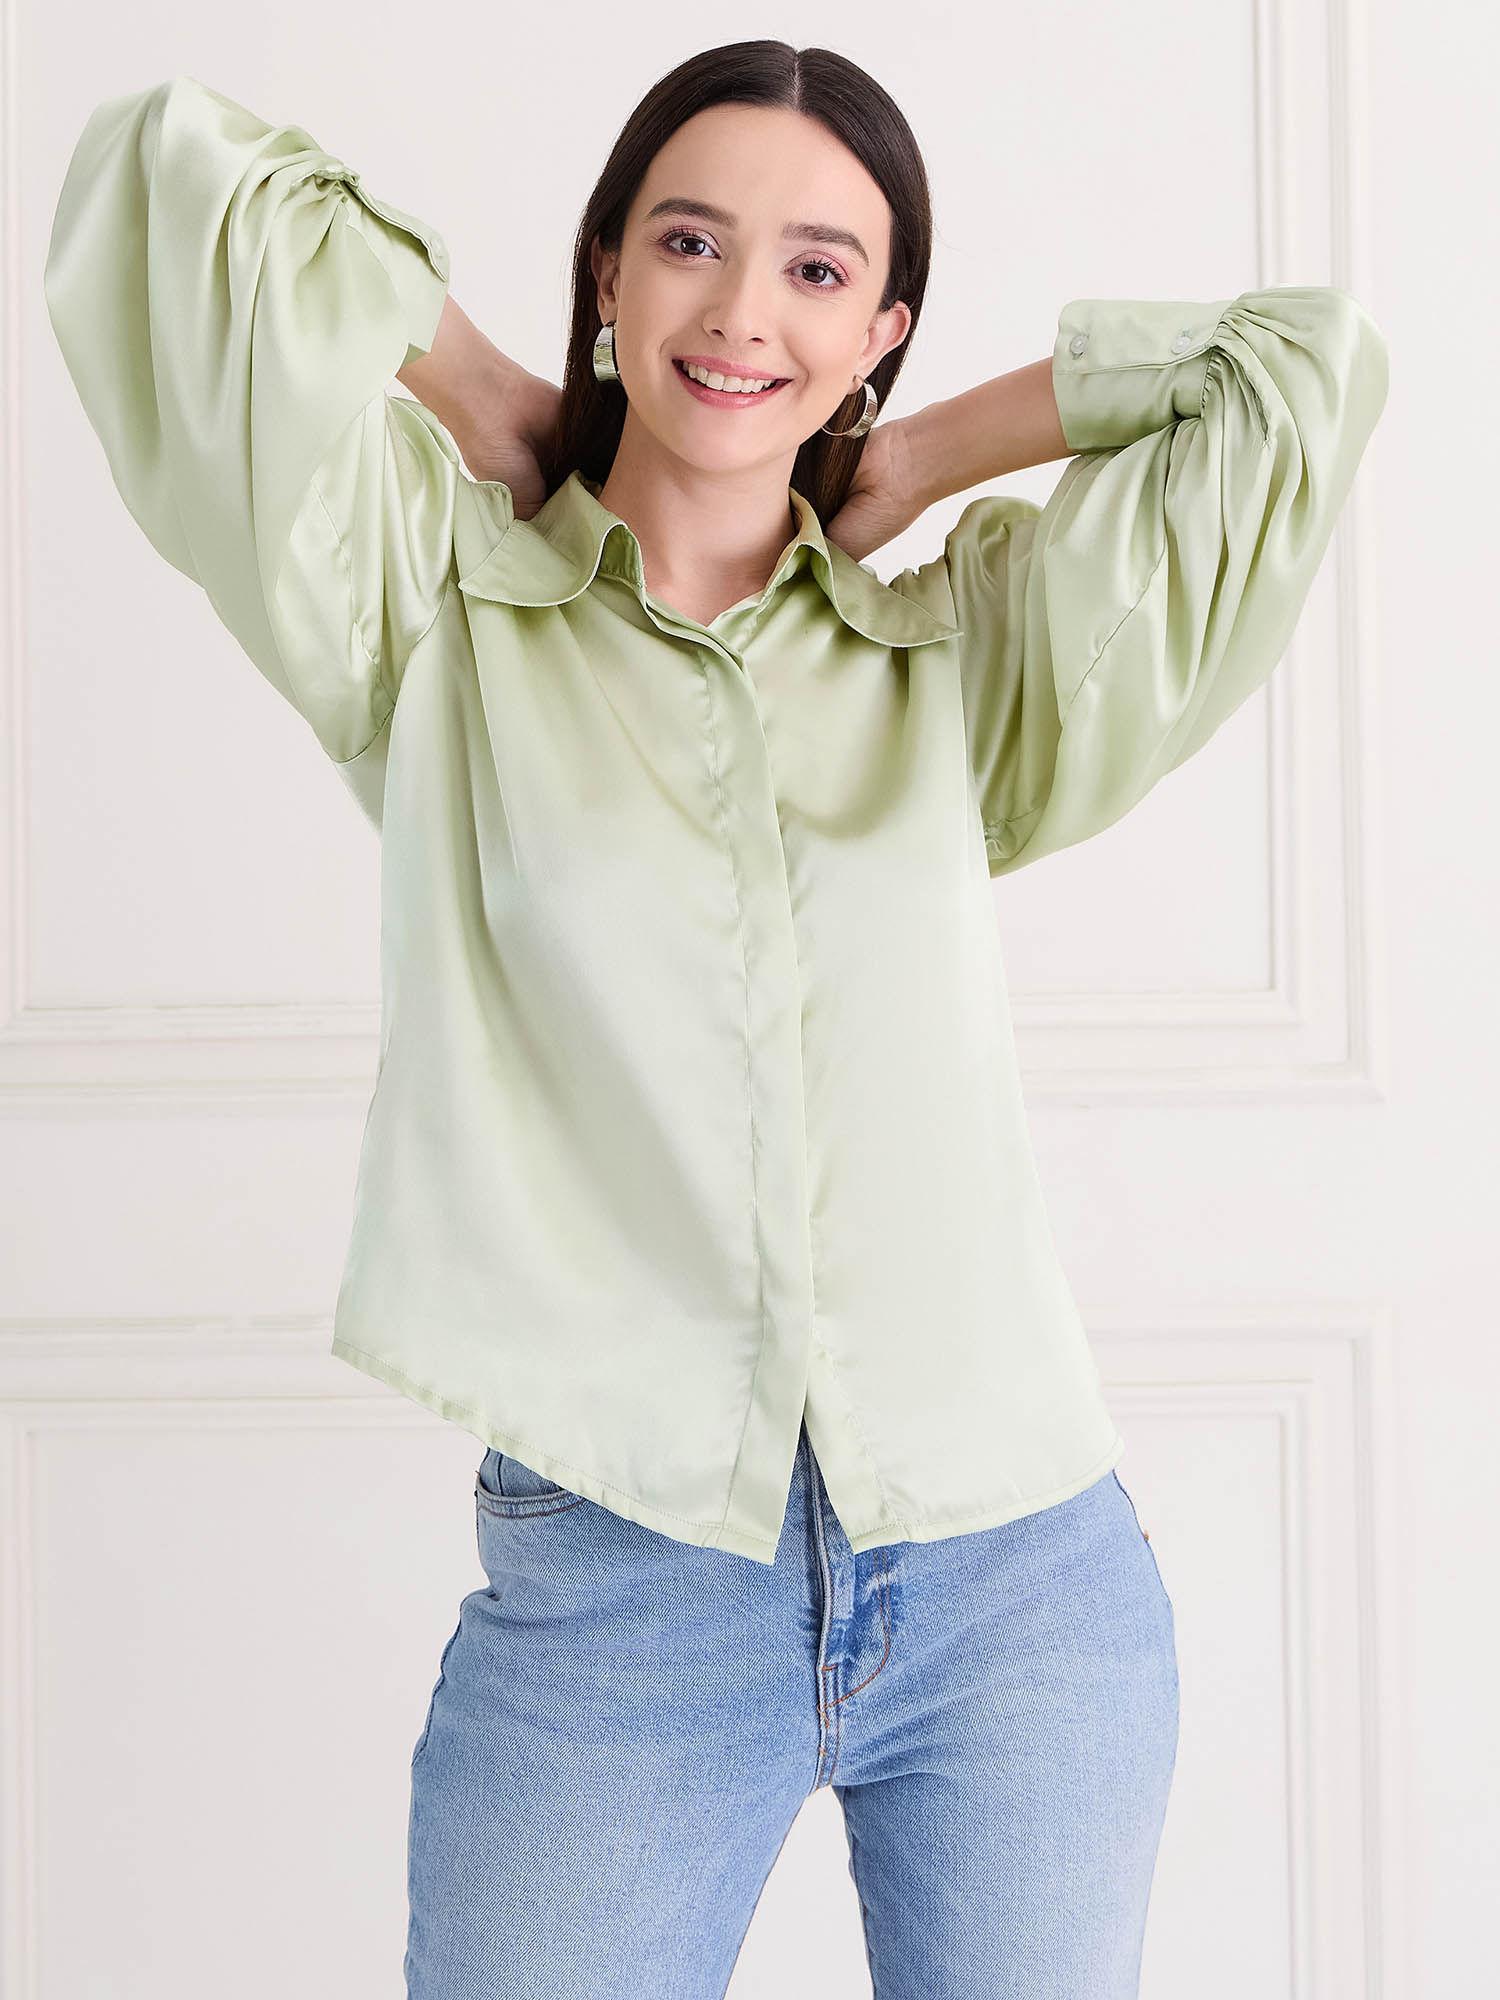 green satin spread collar shirt with shoulder gathers